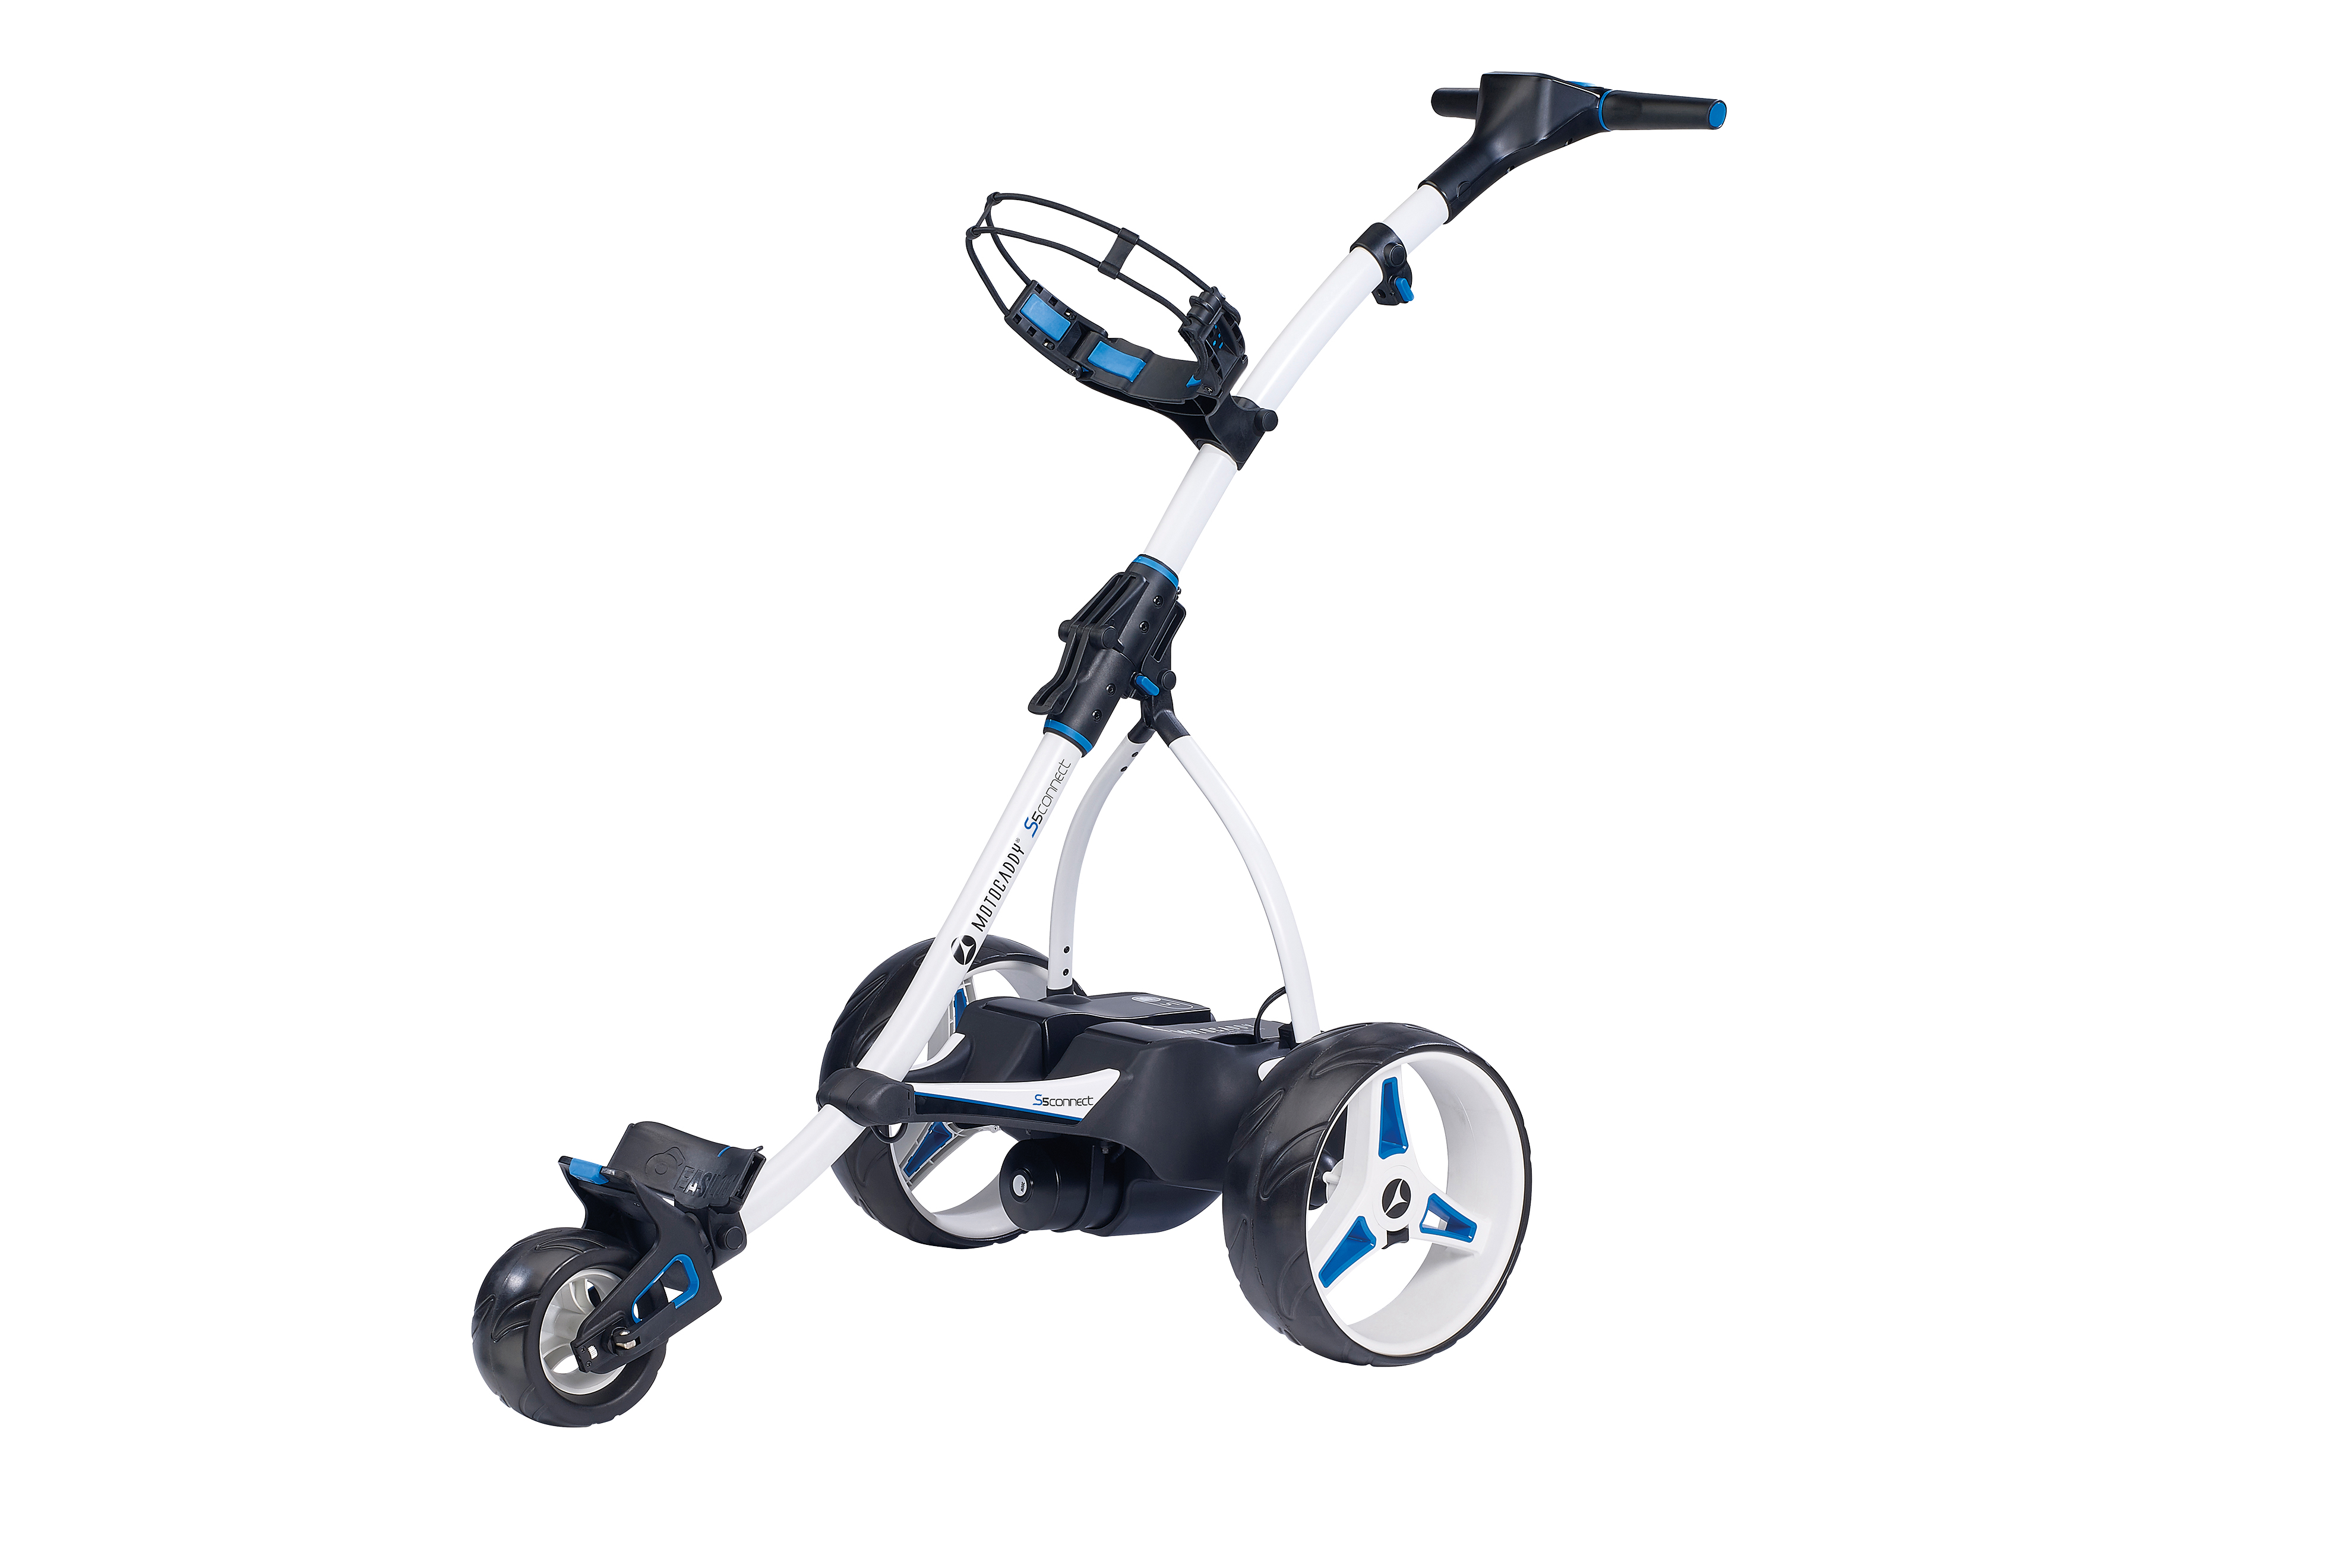 Motocaddy launches S5 Connect with free GPS app